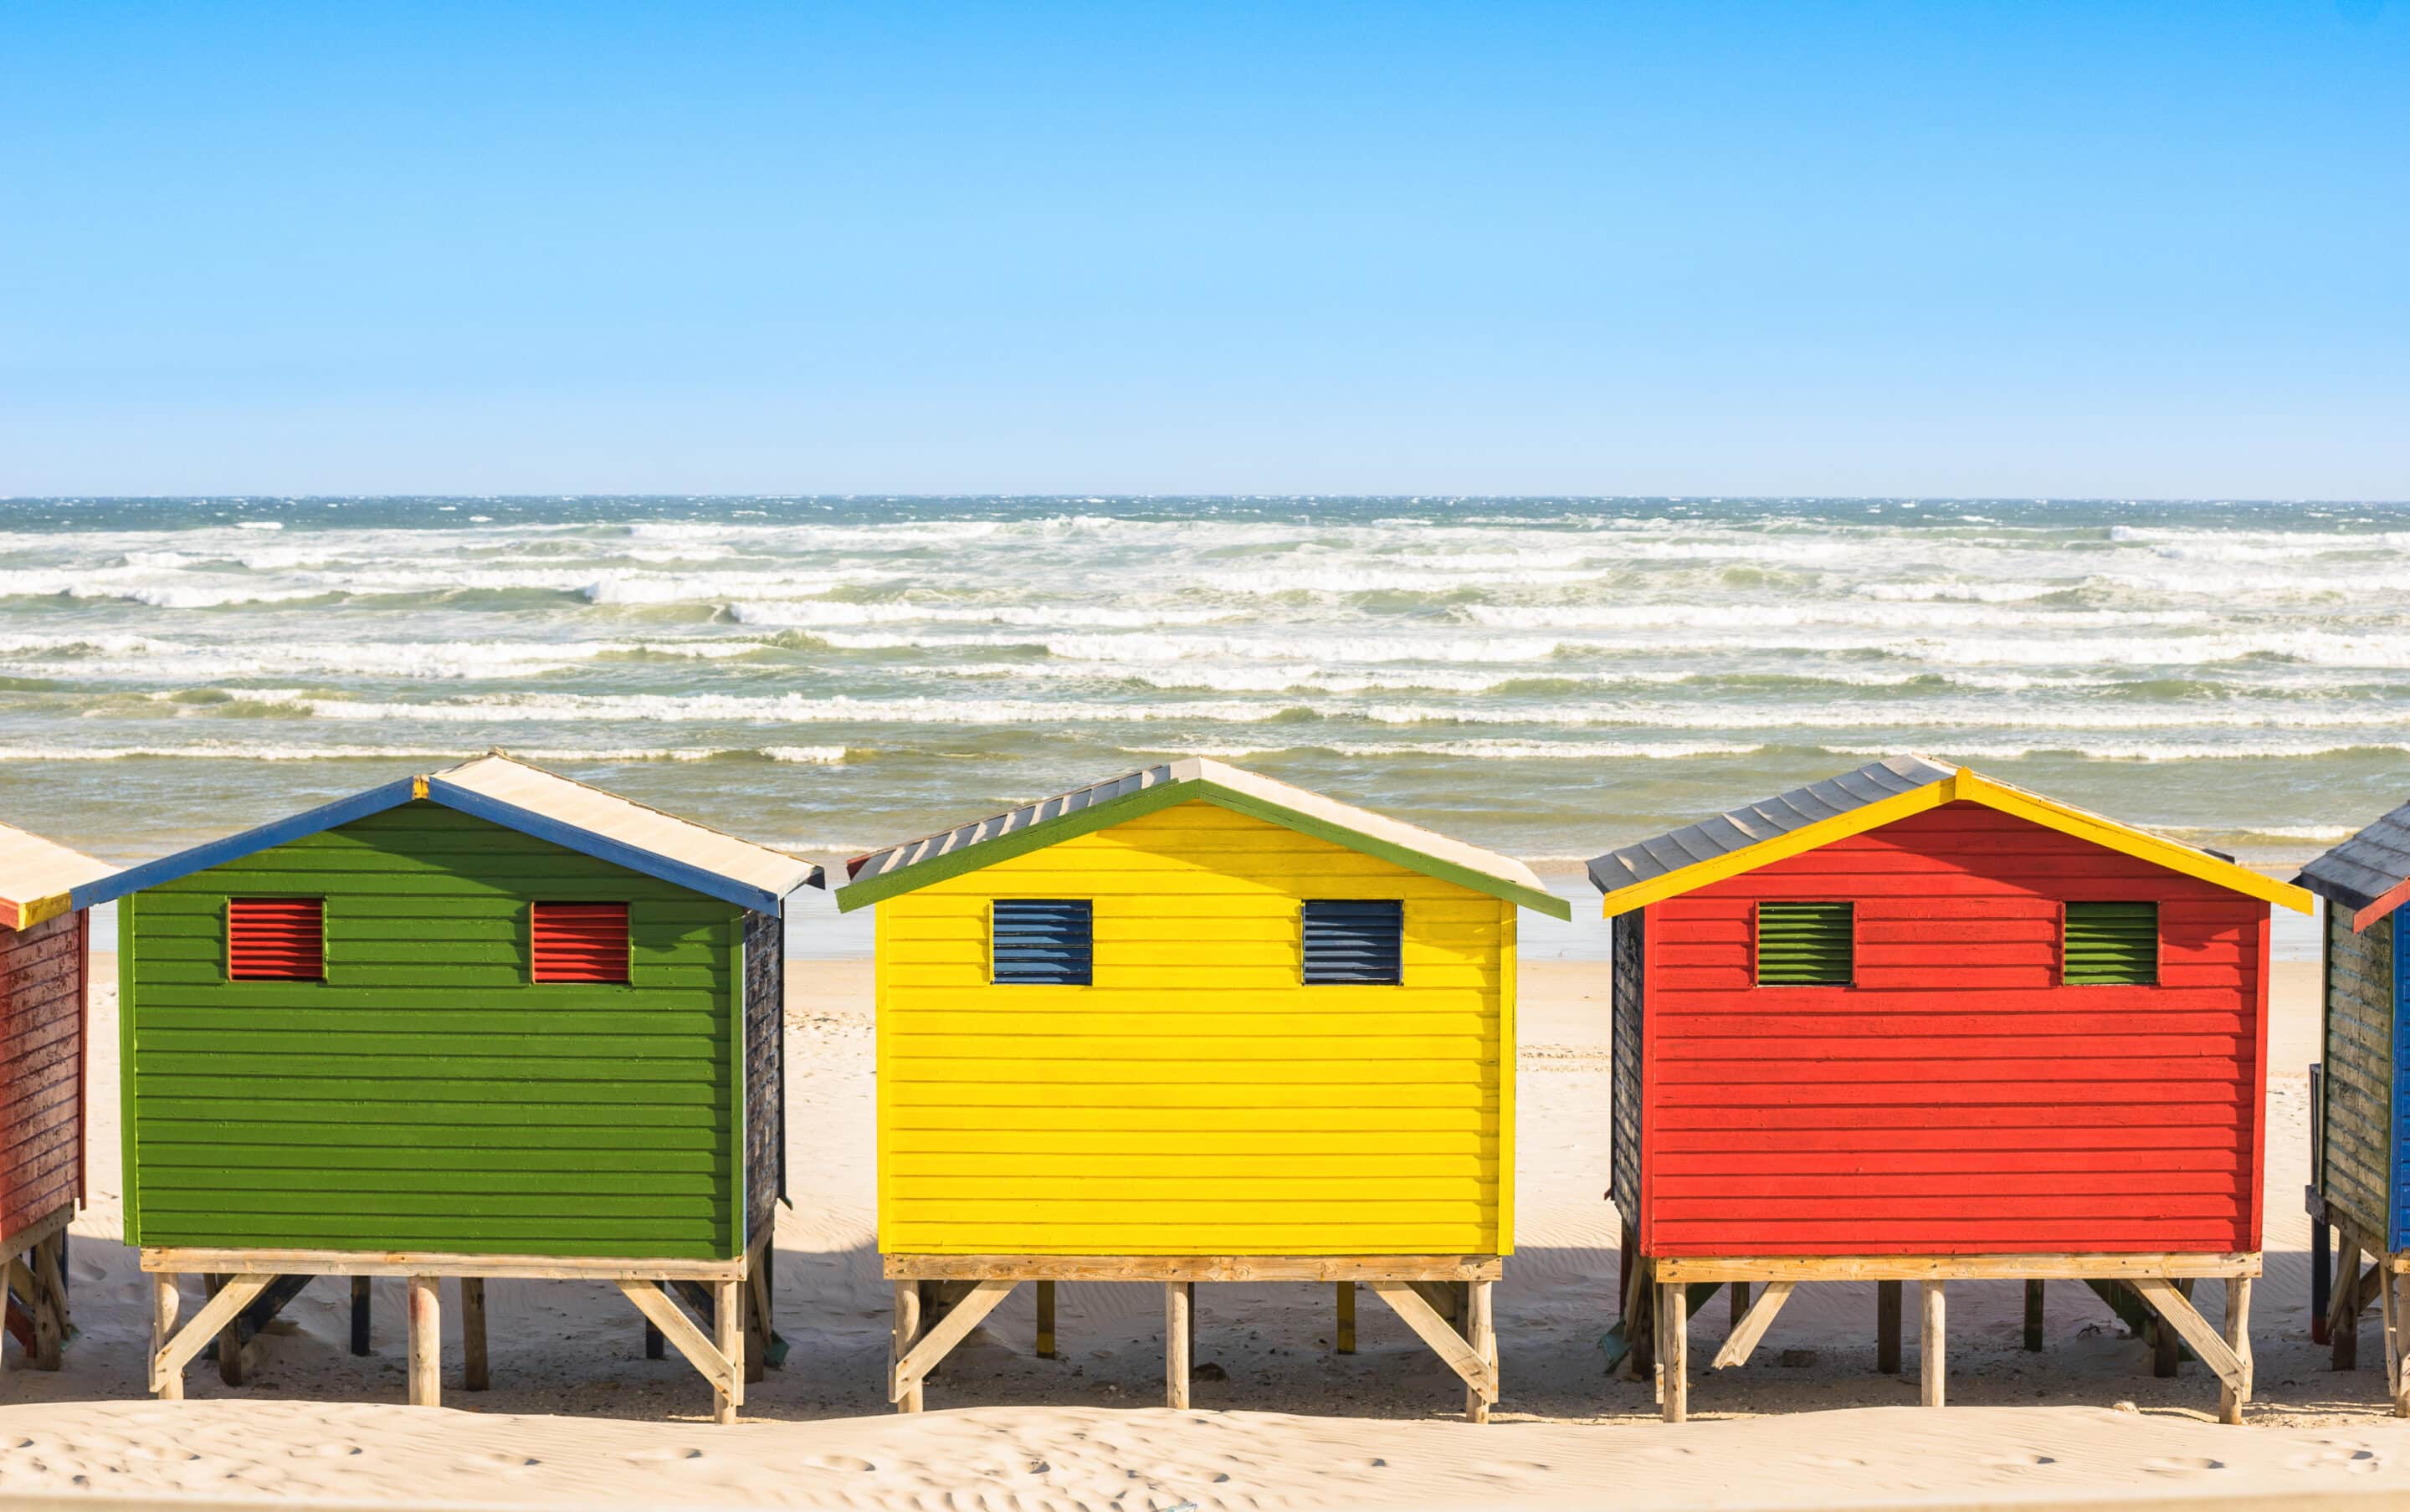 The Multicoloured Huts on Muizenberg beach Cape Town